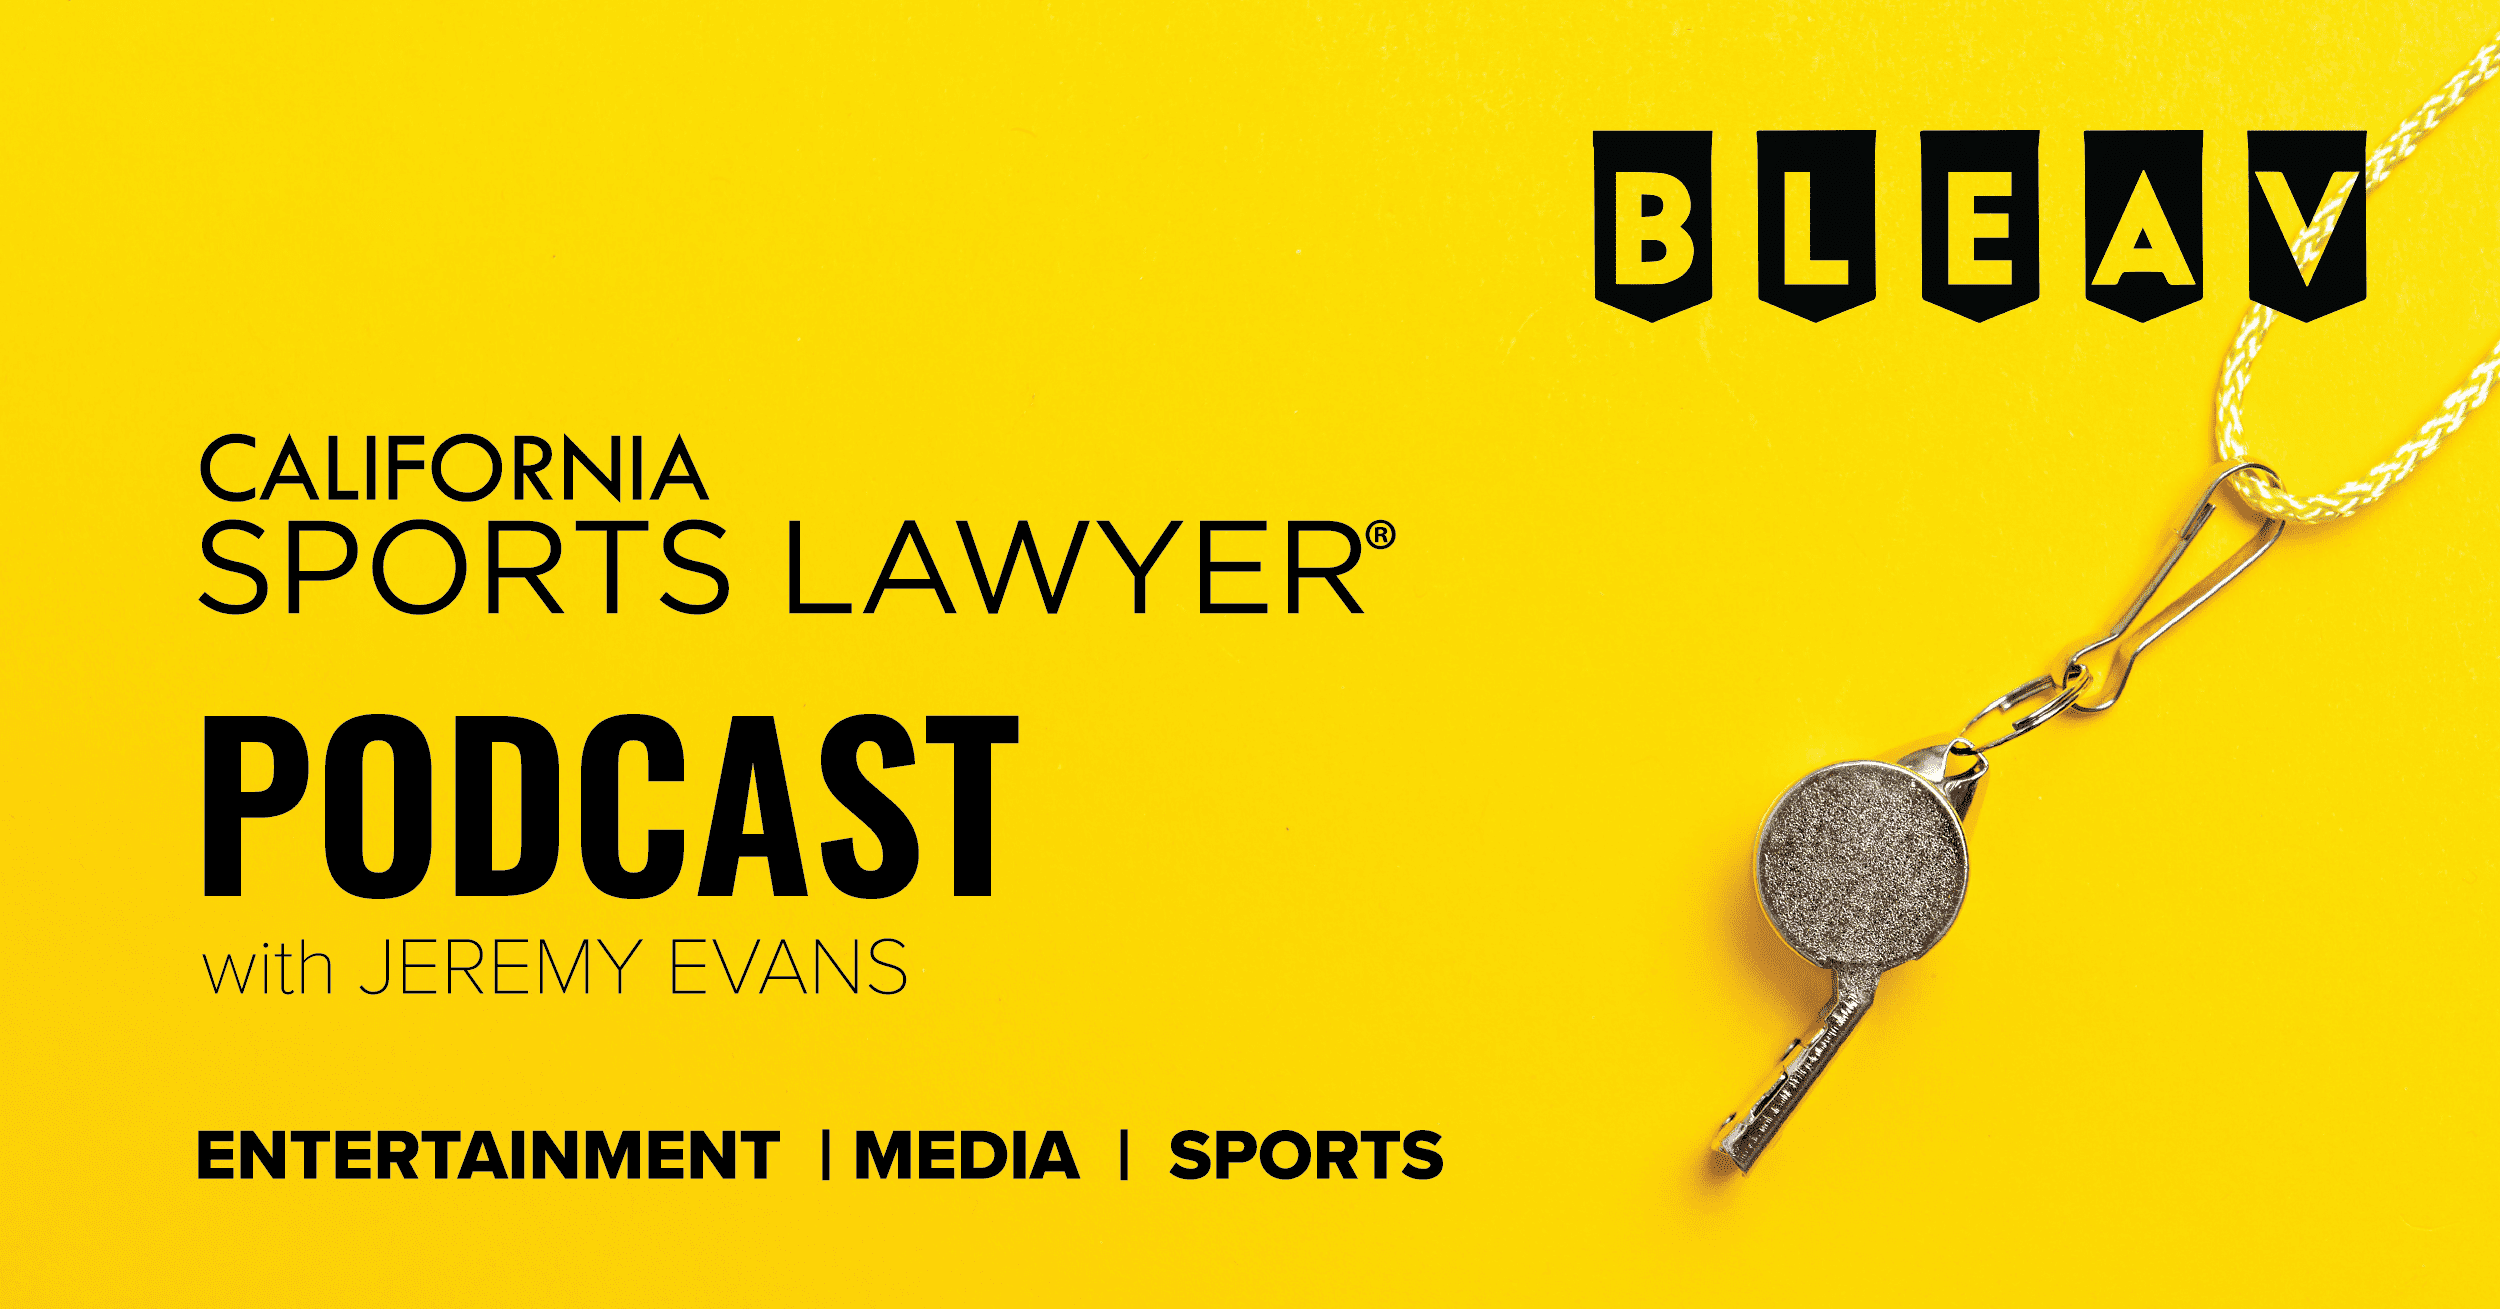 California Sports Lawyer® Podcast with Jeremy Evans: 30+ Minutes of Fame w/ Sports Antitrust Law Partner Jill Manning at Pearson Warshaw, LLP